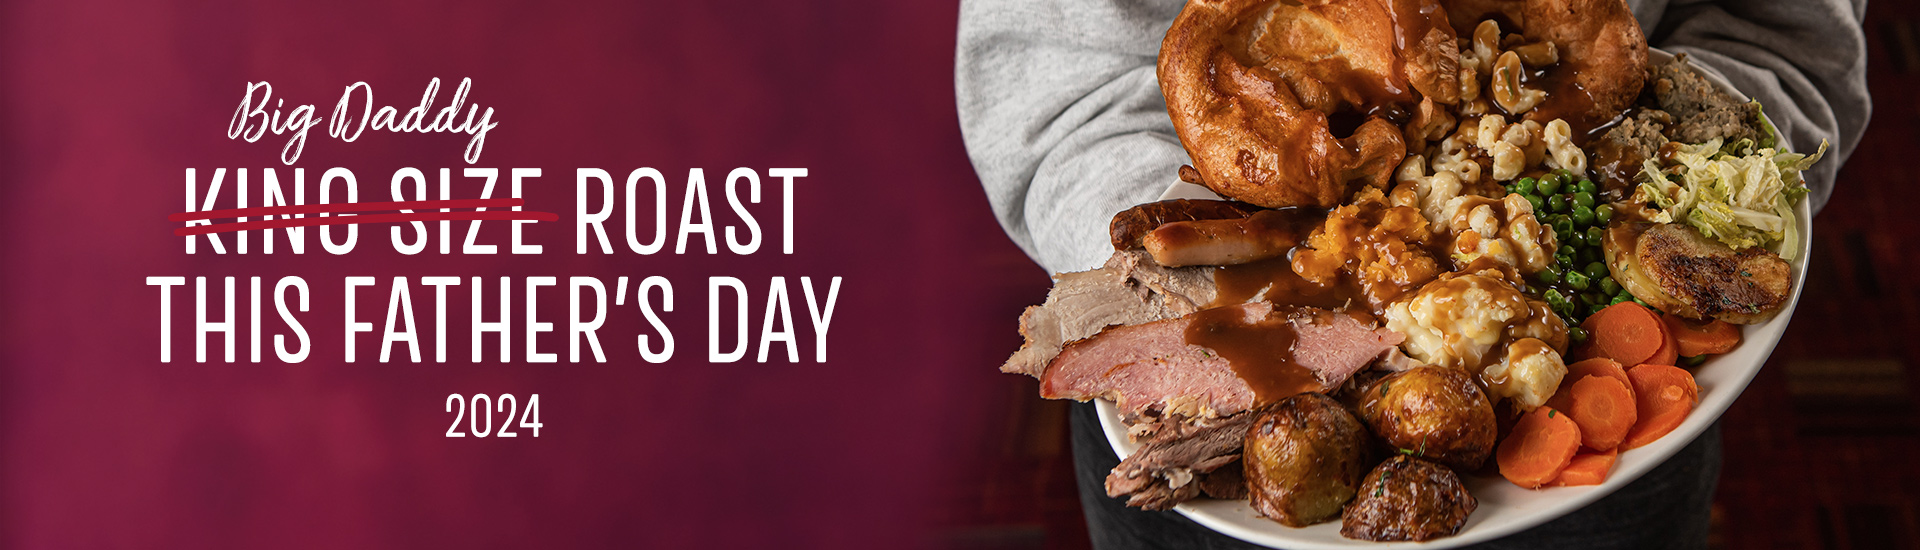 Father’s day carvery in Cannock, Father’s day at Toby Carvery Norton Canes